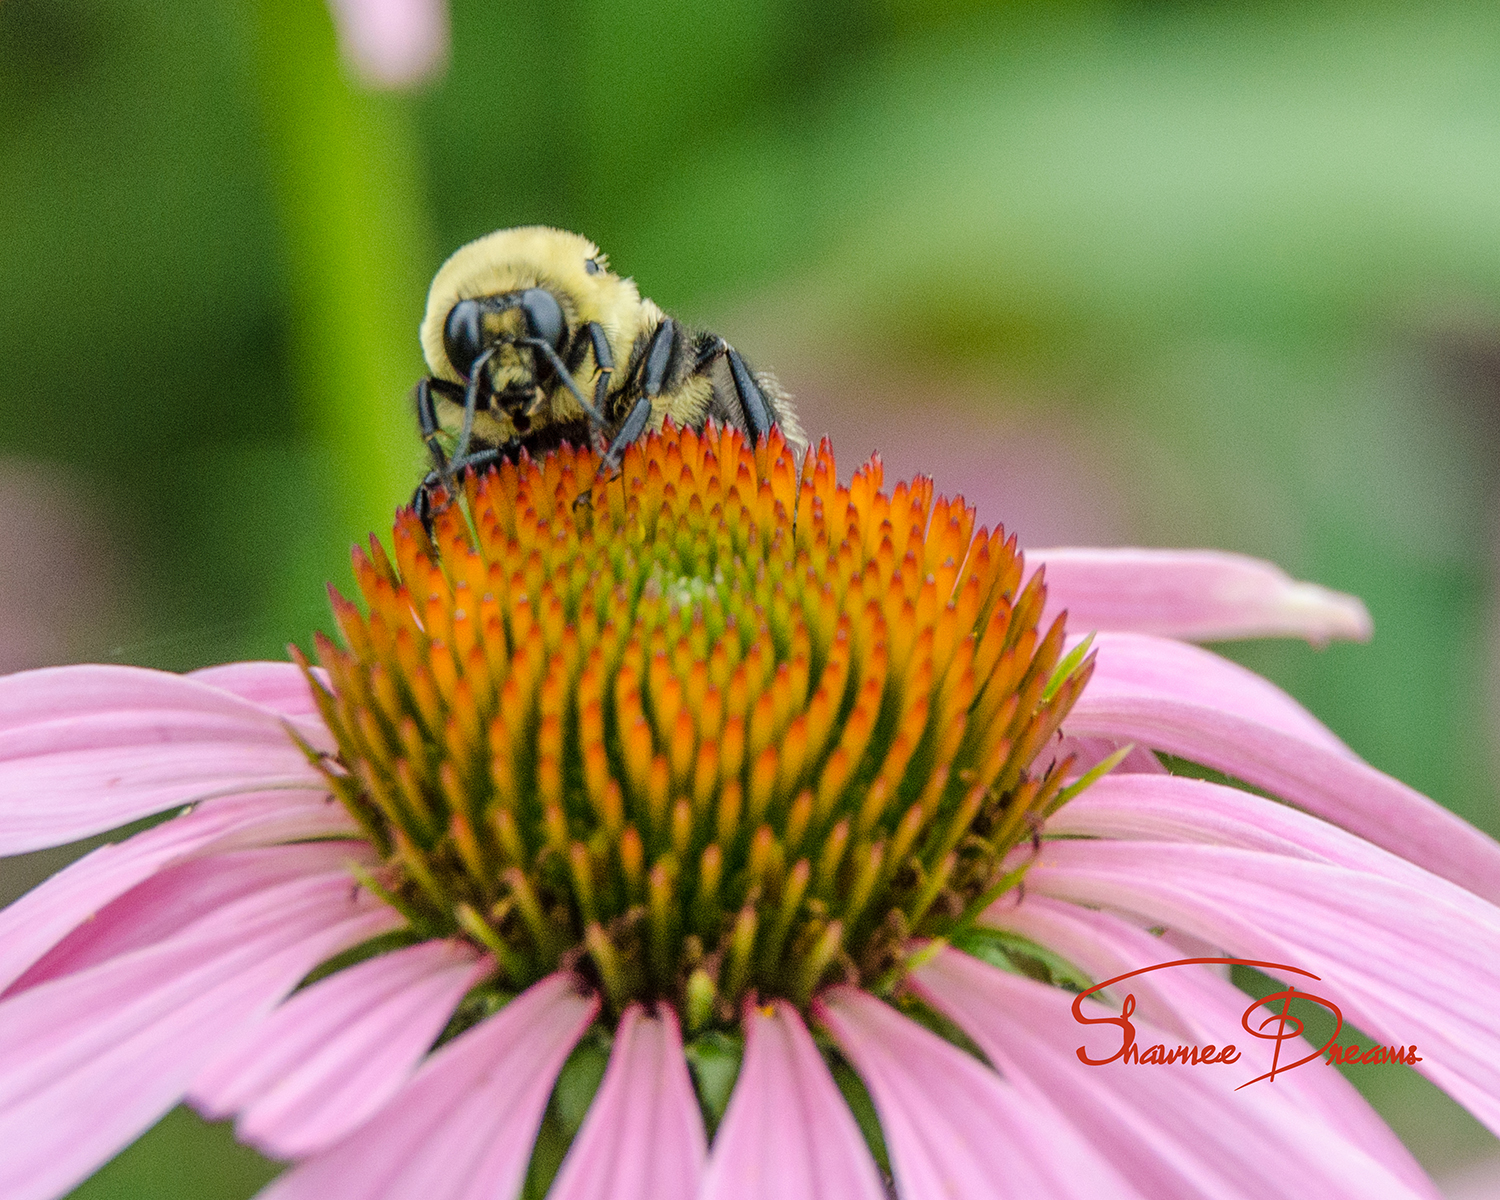 Bumble and coneflower